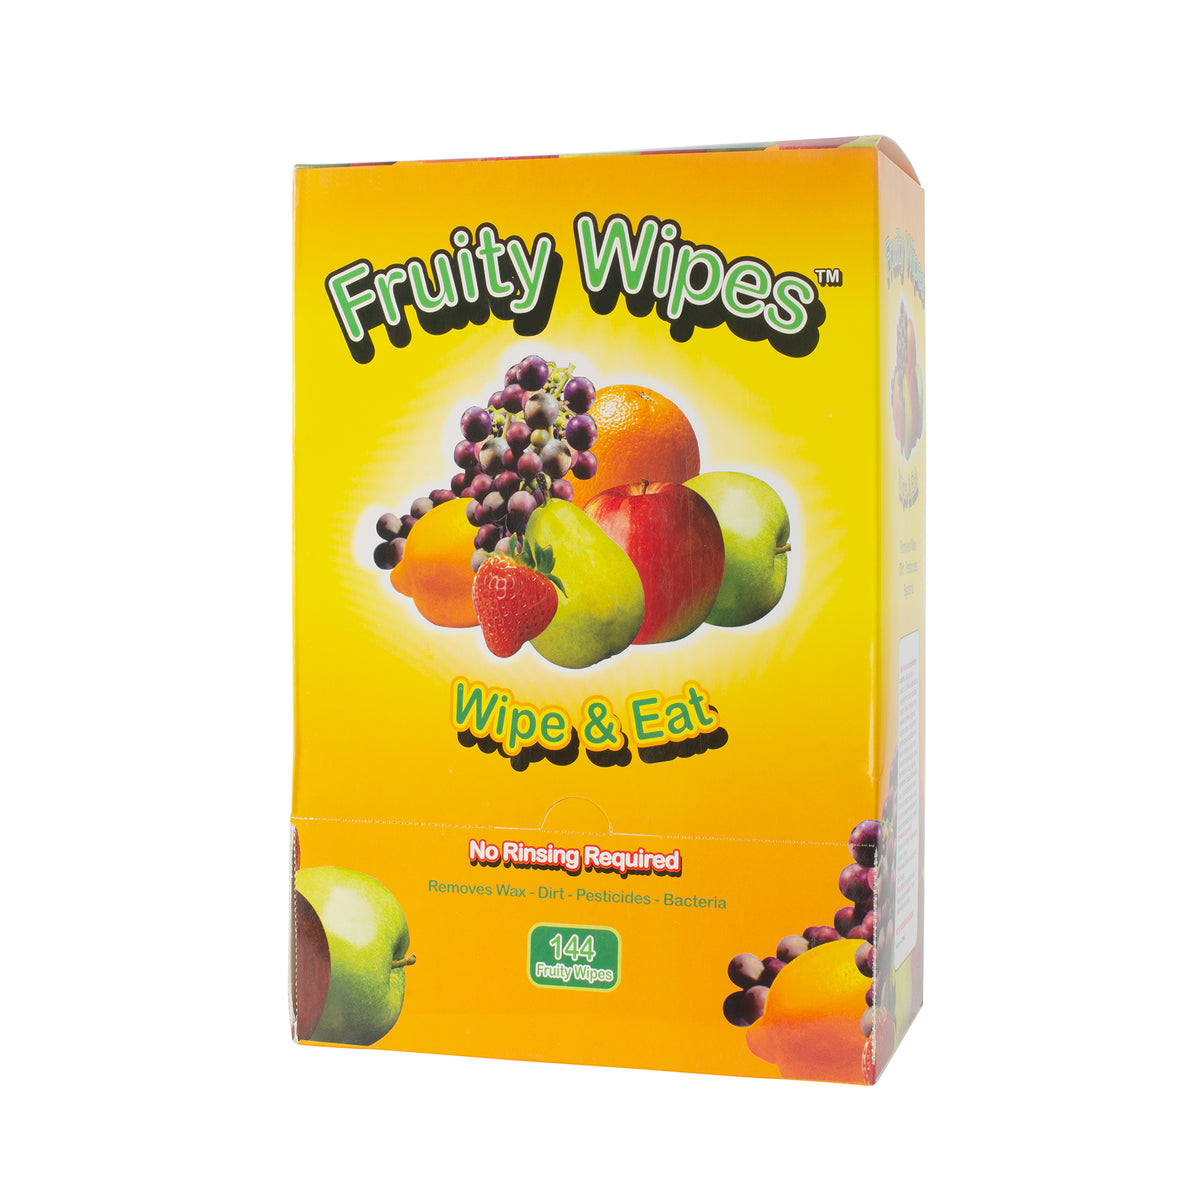 Fruity Wipes 144 Count Box of All Natural Individually Wrapped Wipes to clean fruits and vegetables. 